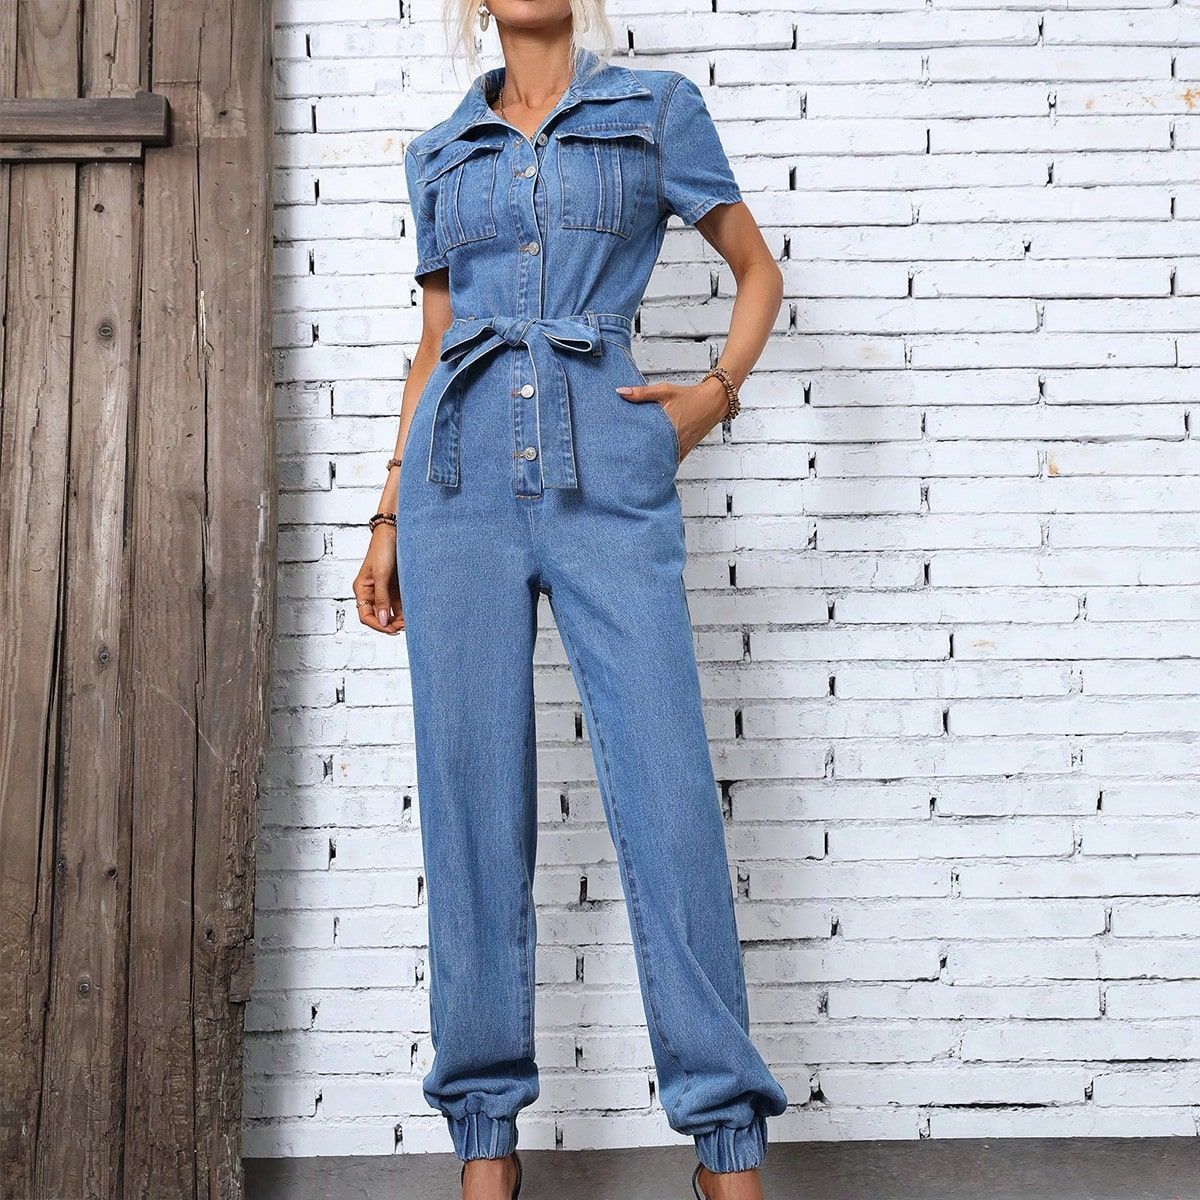 Women Clothing Casual Office Slim Fit Overall Jeans